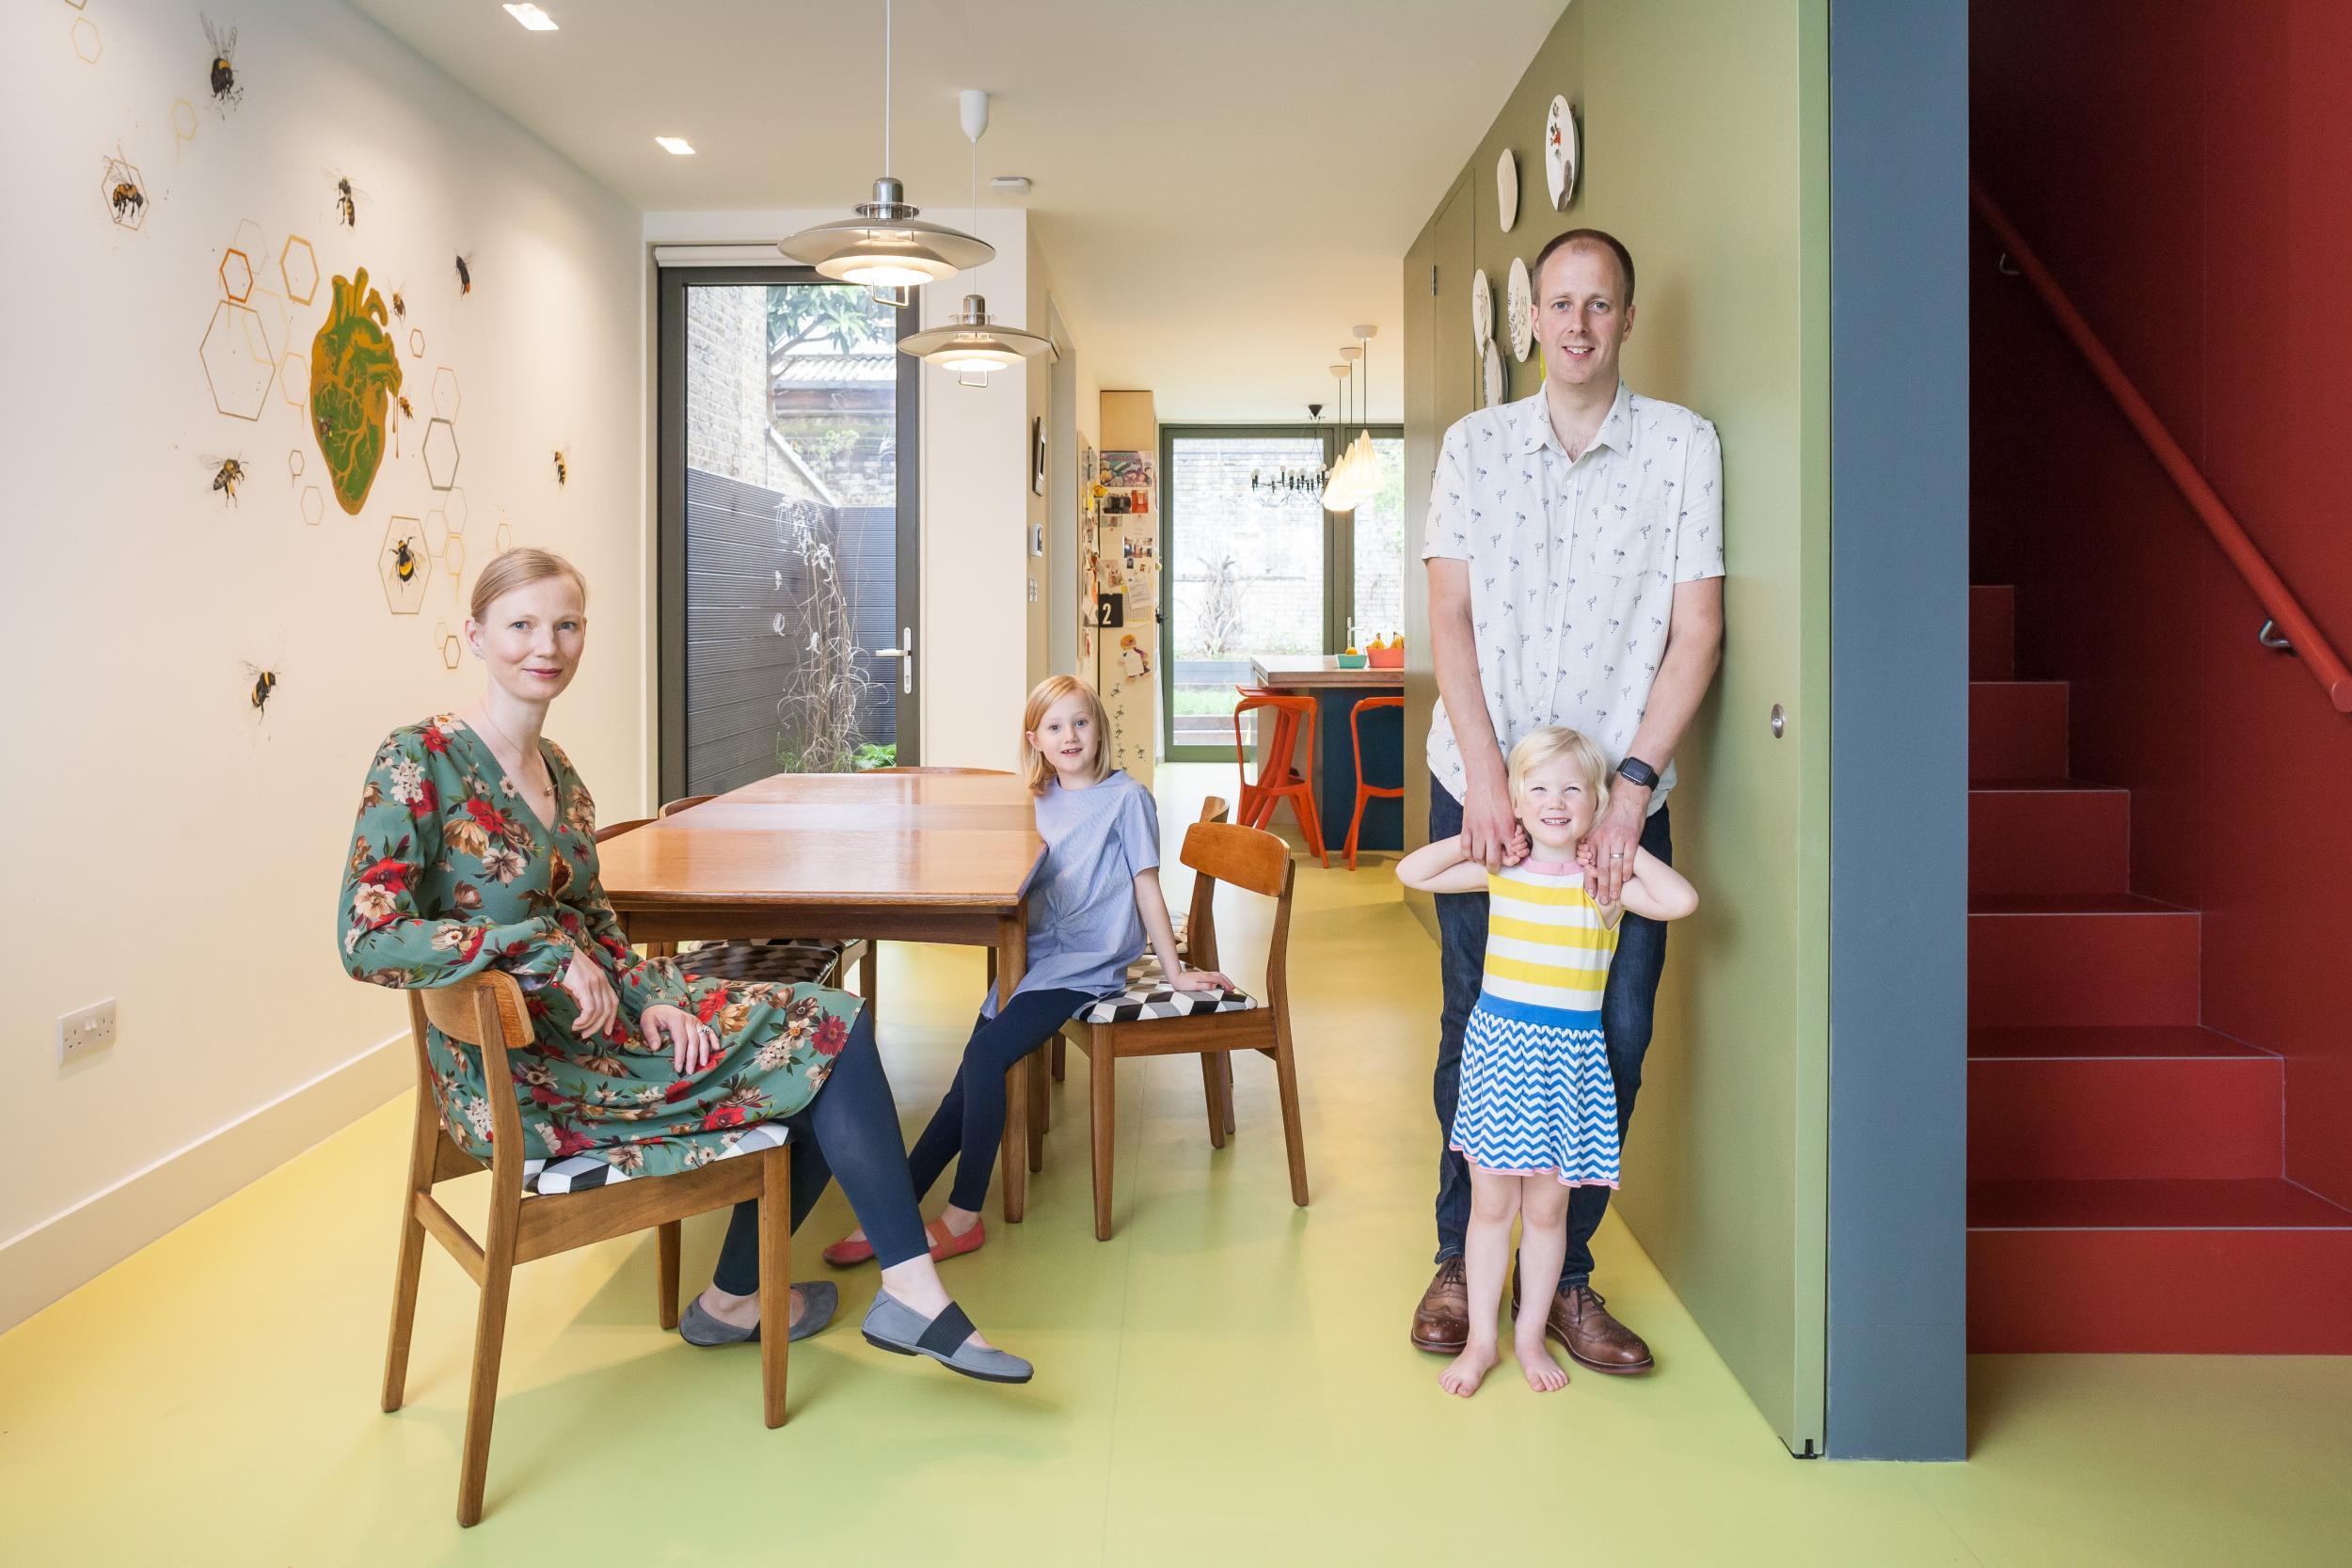 How this family 'stepped outside the safe zone' with Technicolour home